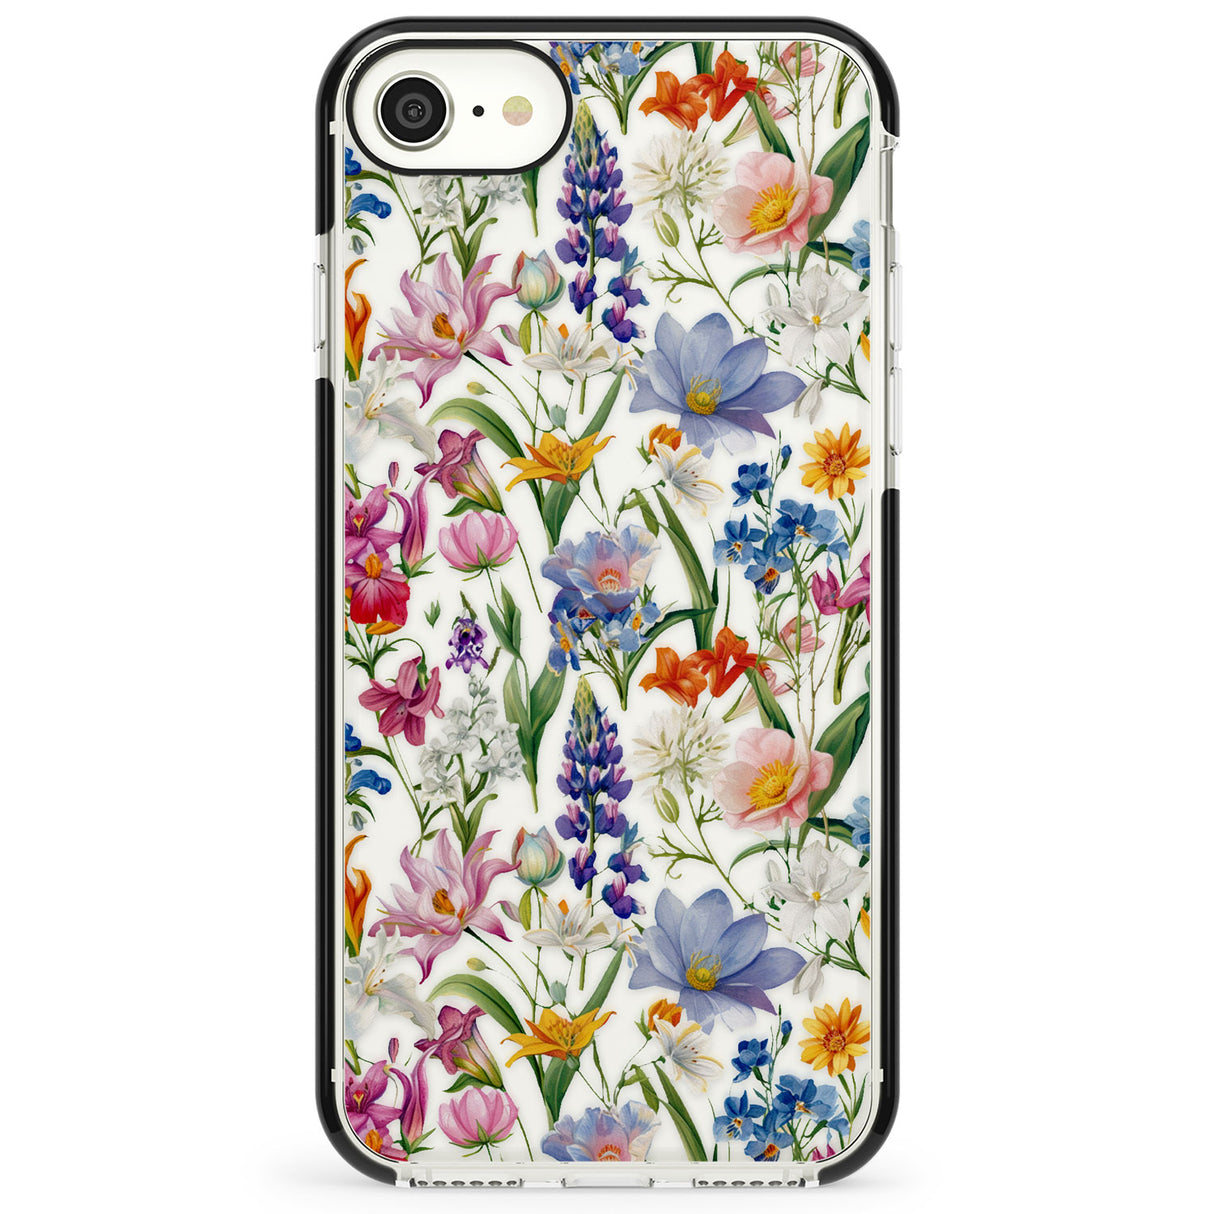 Vintage Wildflowers Impact Phone Case for iPhone SE